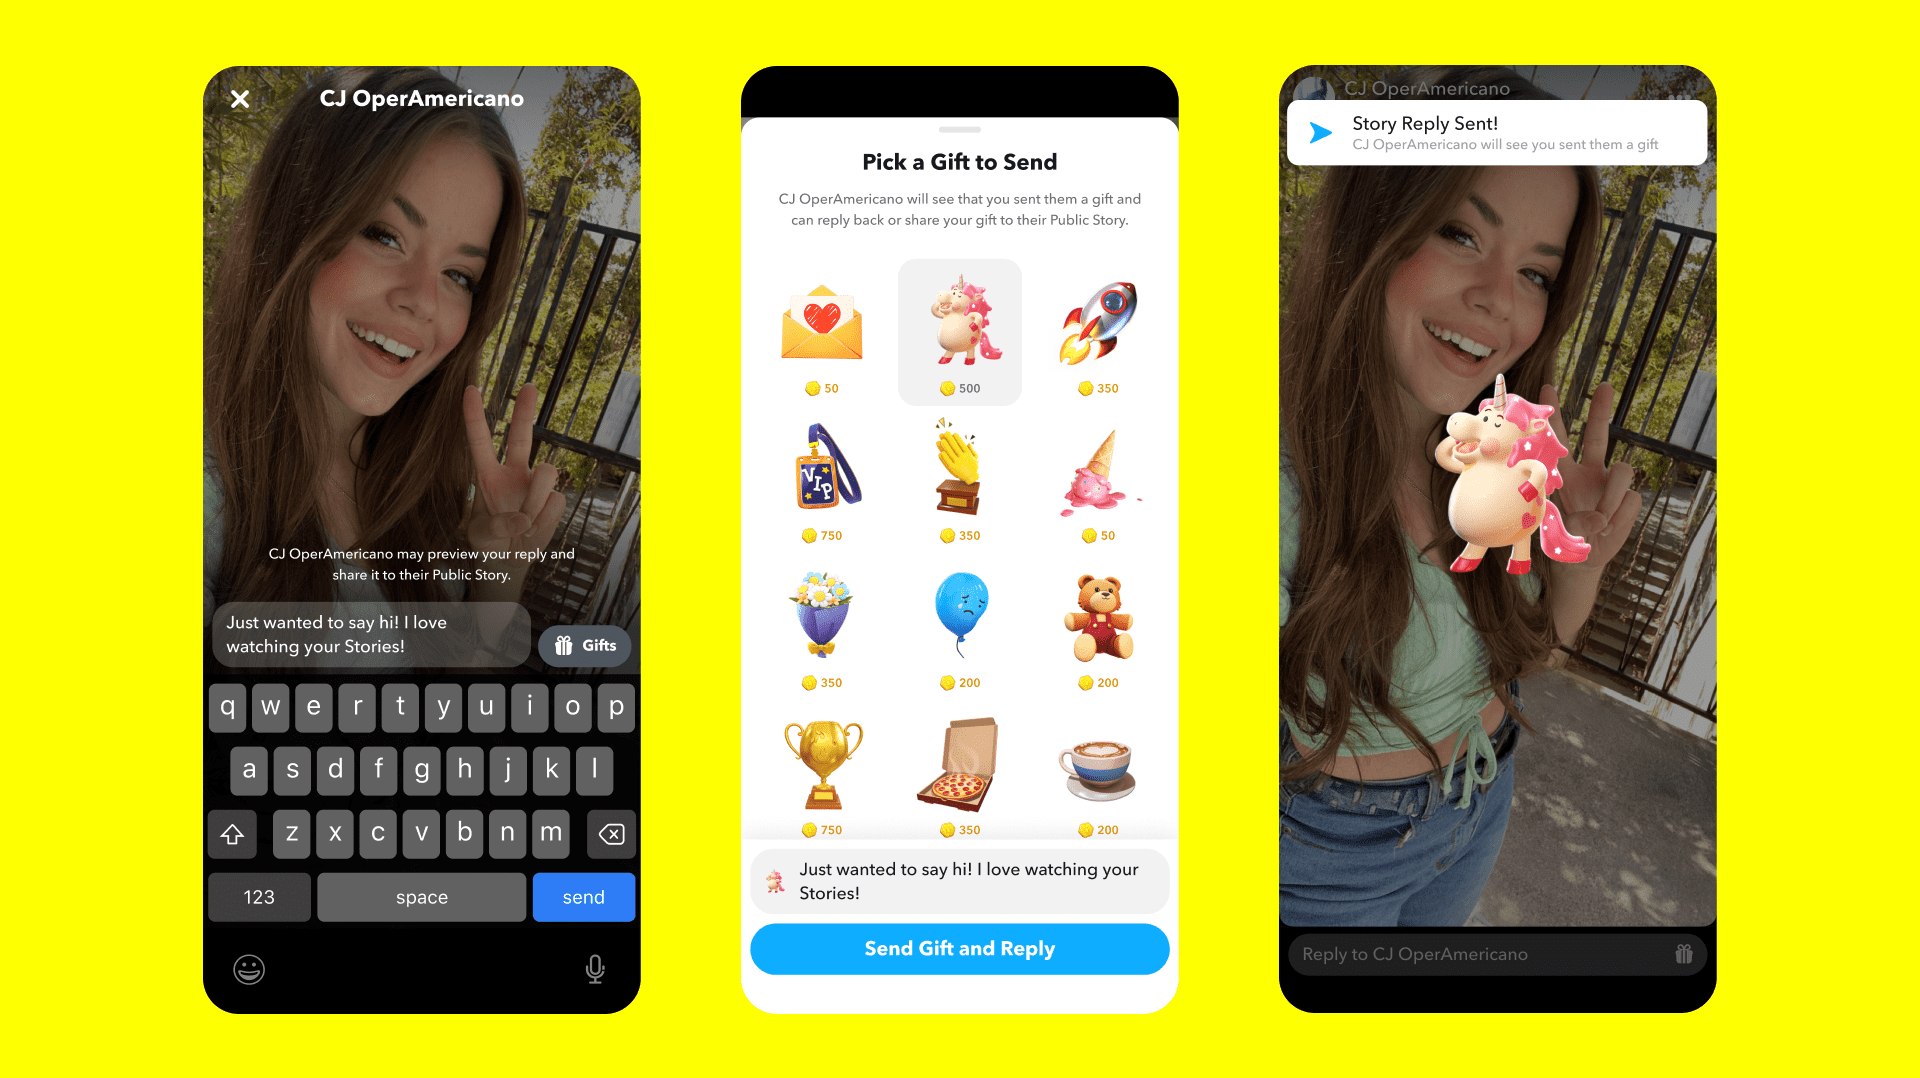 How to use Snap Tokens